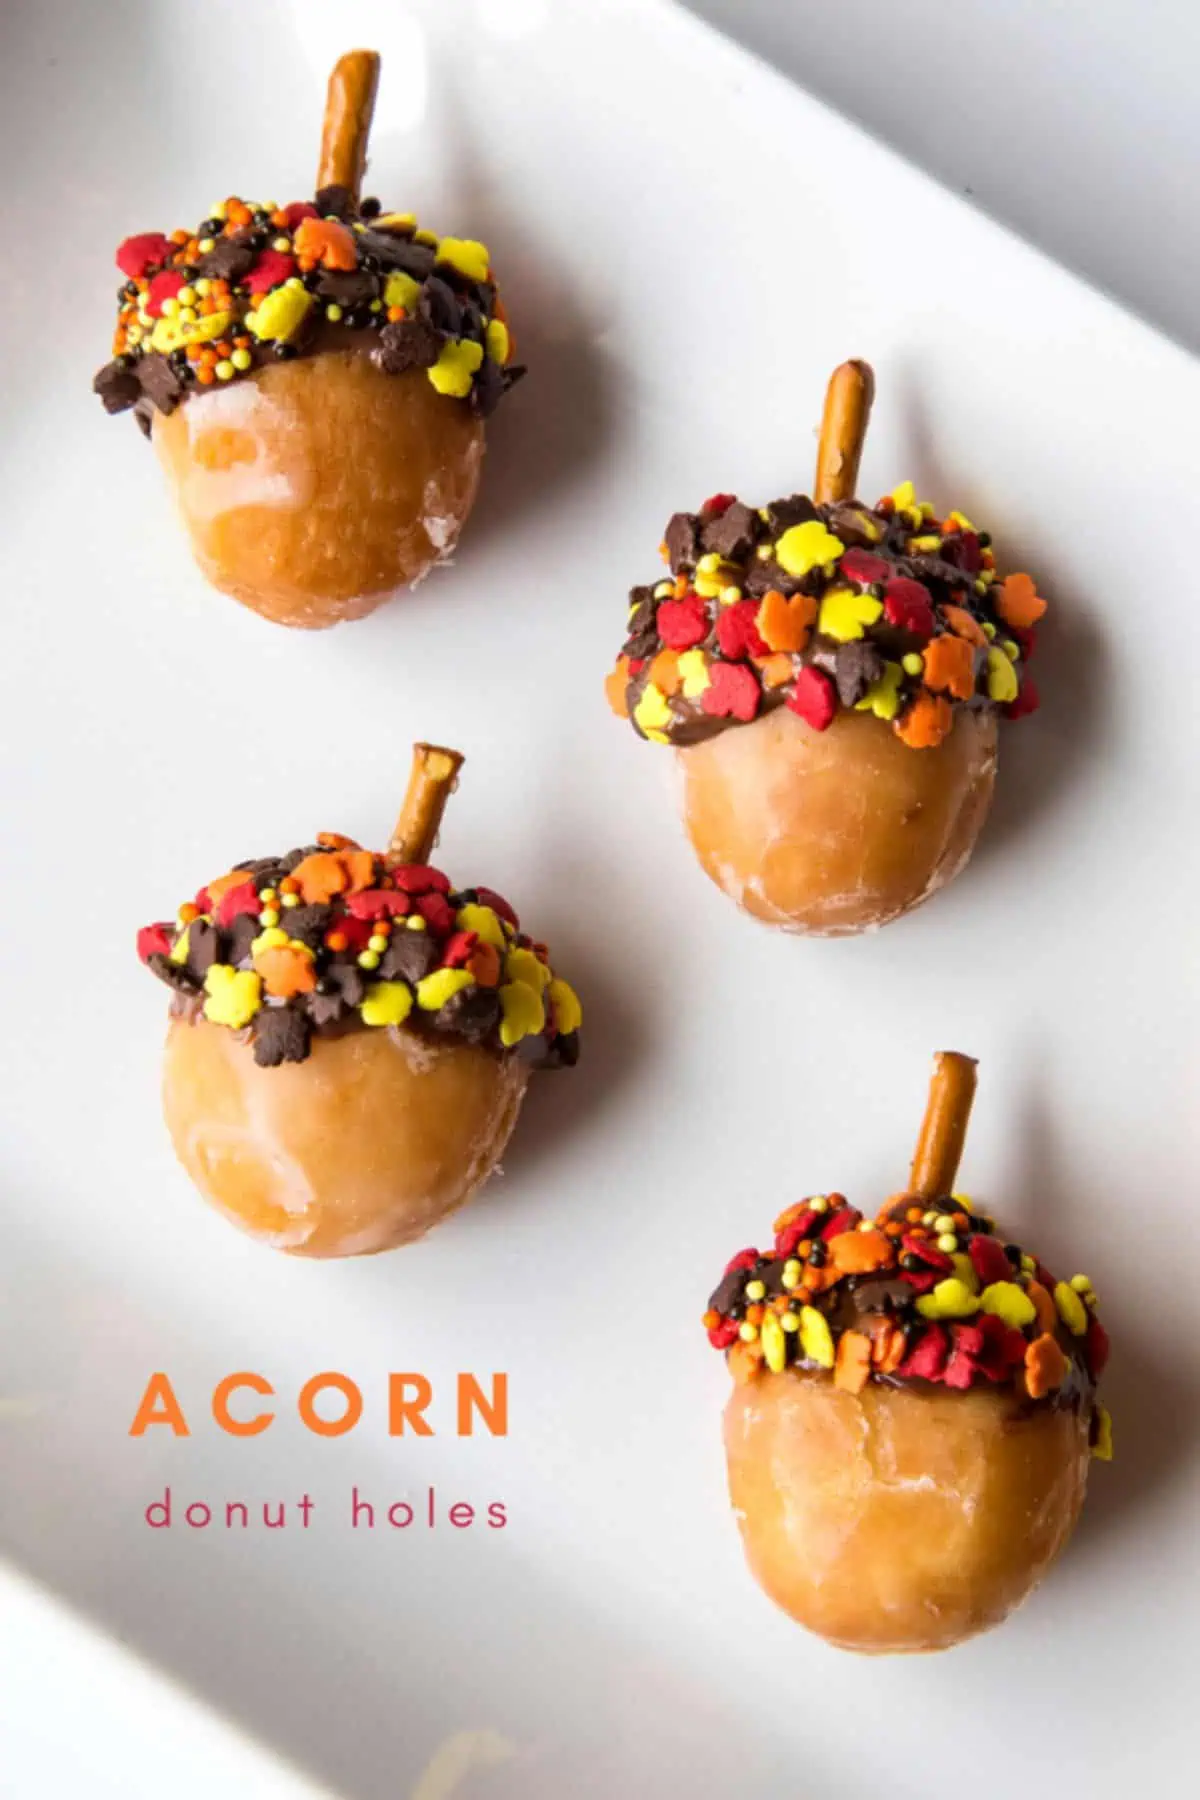 donut holes dipped about 30% in chocolate with fall sprinkles in the chocolate and a pretzel stick in the top to make donut hole acorns